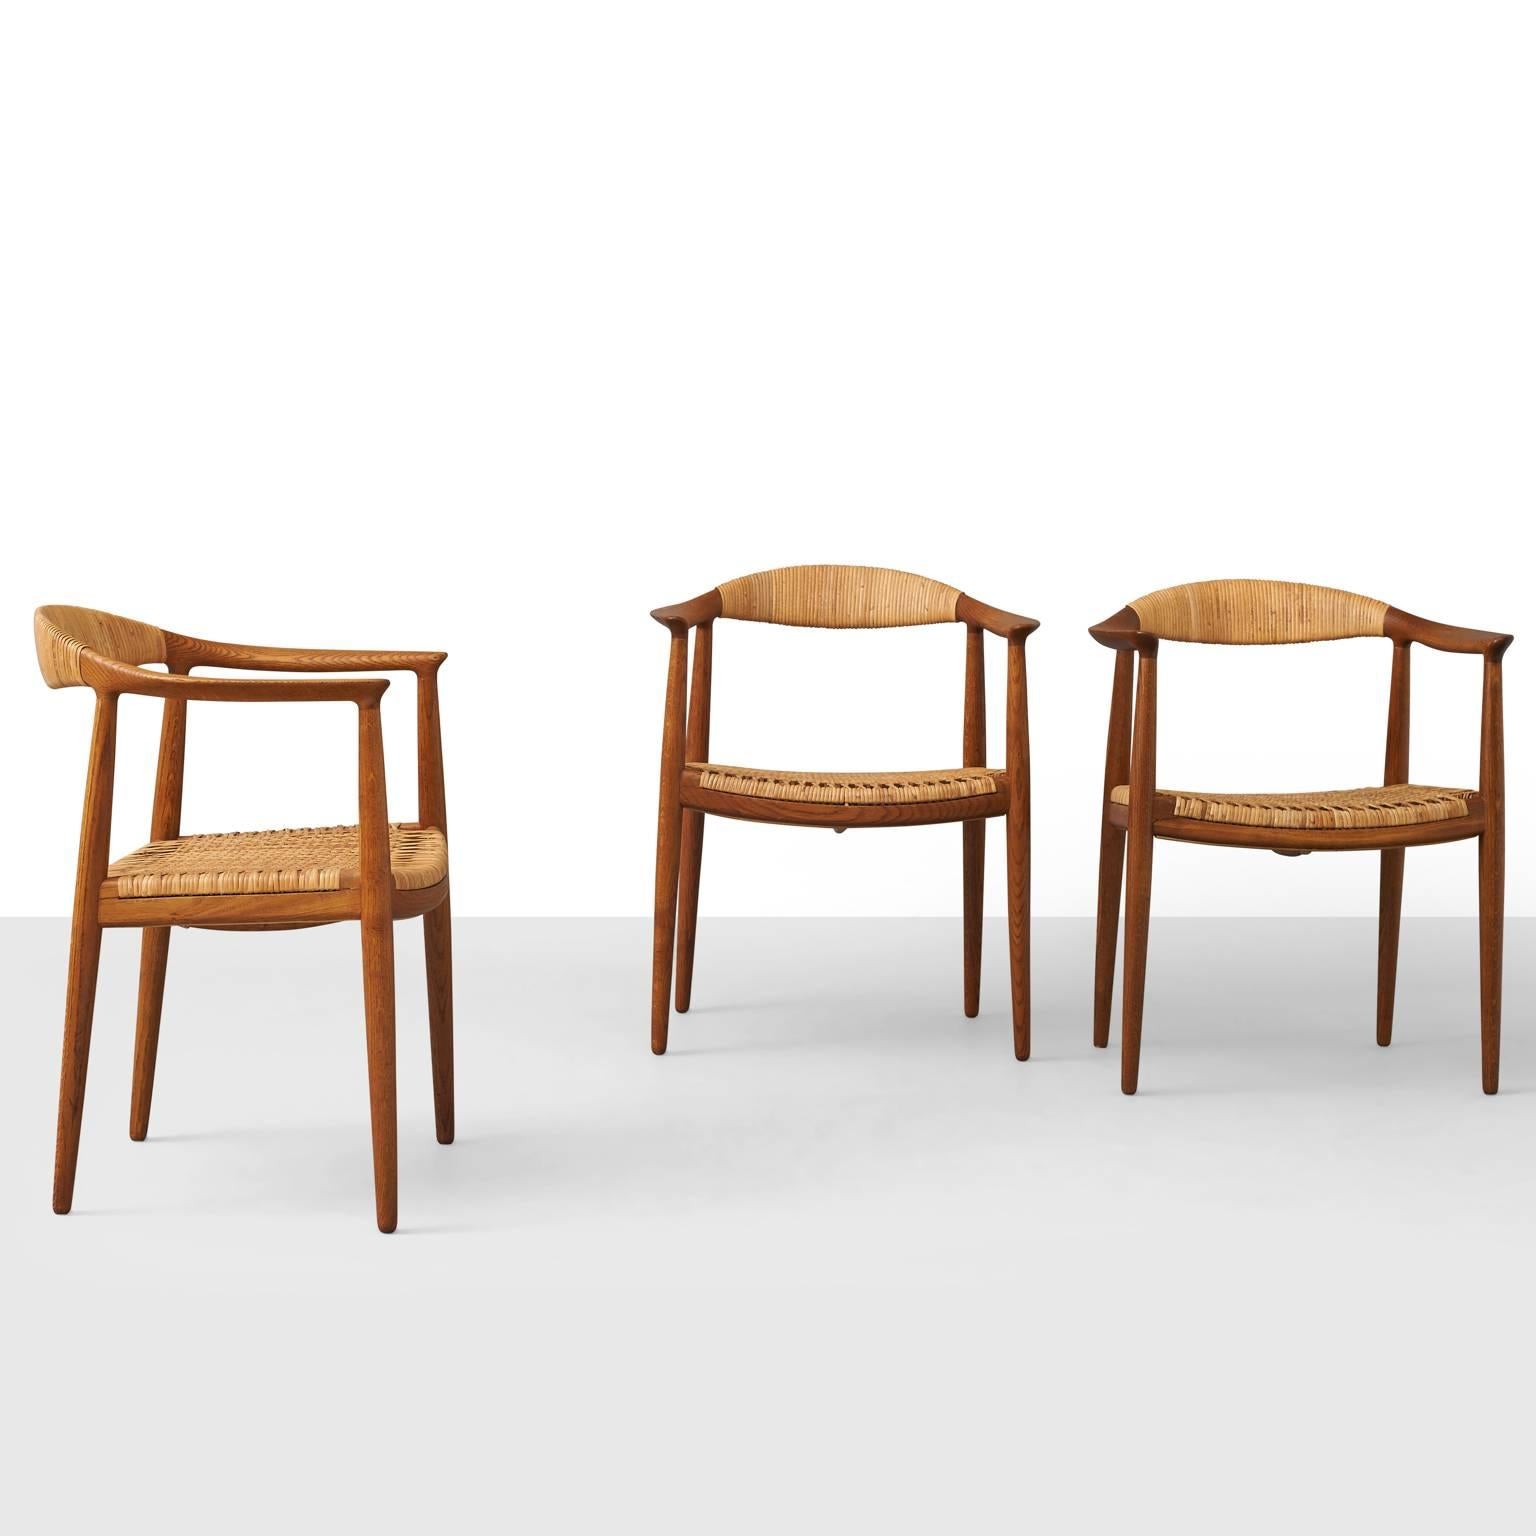 Earliest version of 'The Chair.' Open-arm chairs of oak with caned seats. Curved back and tapering legs. Made by Johannes Hansen. Branded, Johannes Hansen Copenhagen, Denmark. Priced individually.